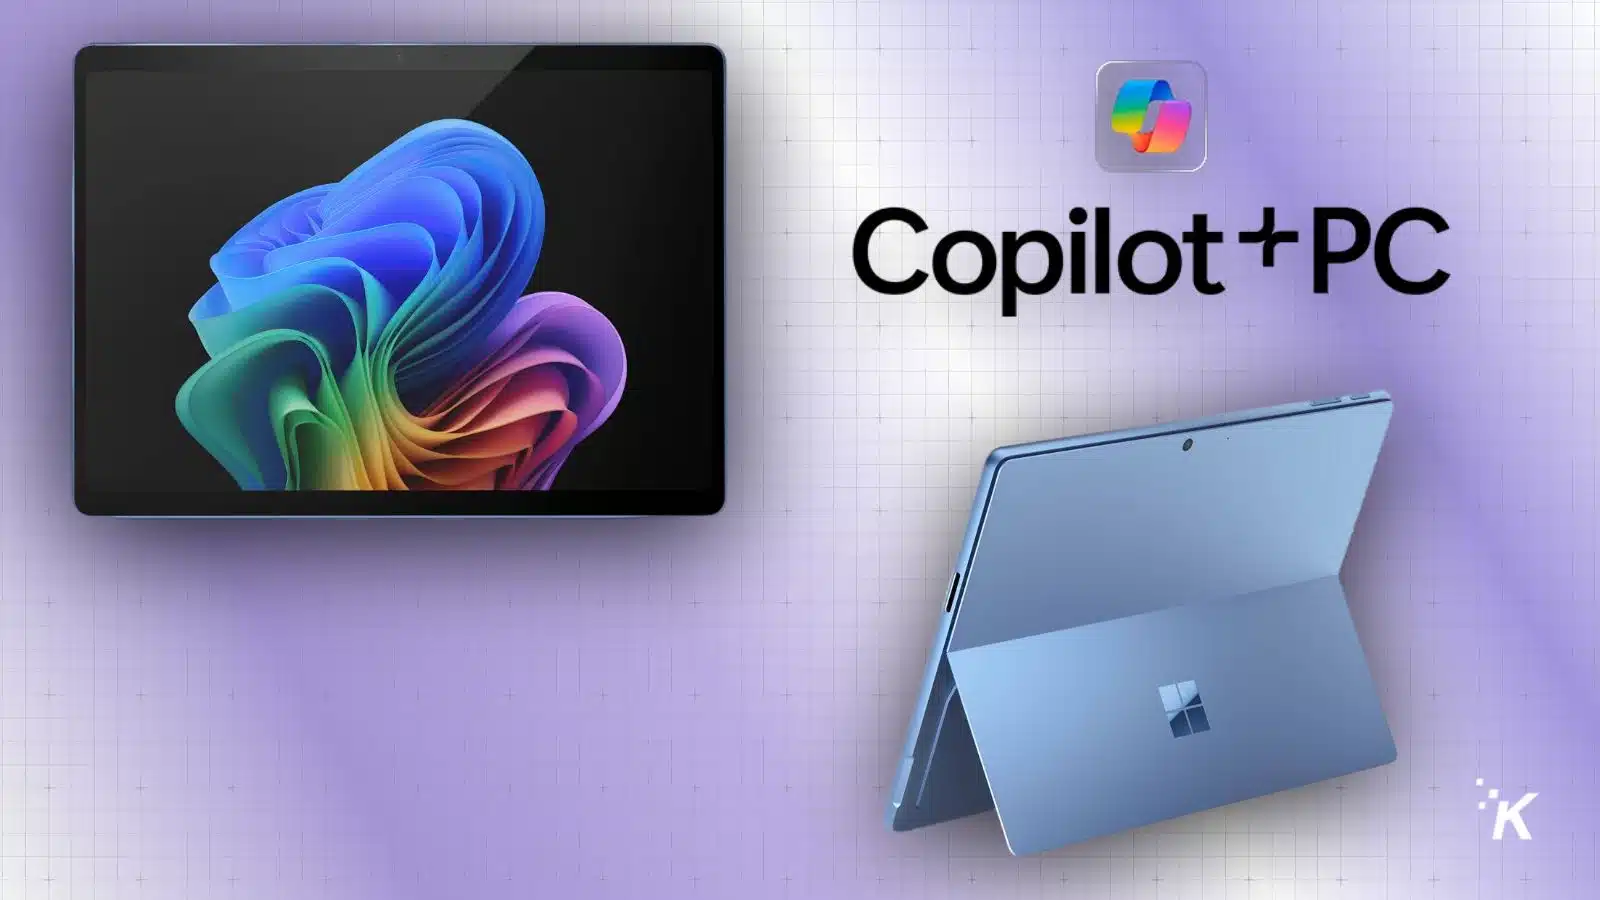 Another good laptop gets swept away by Copilot+